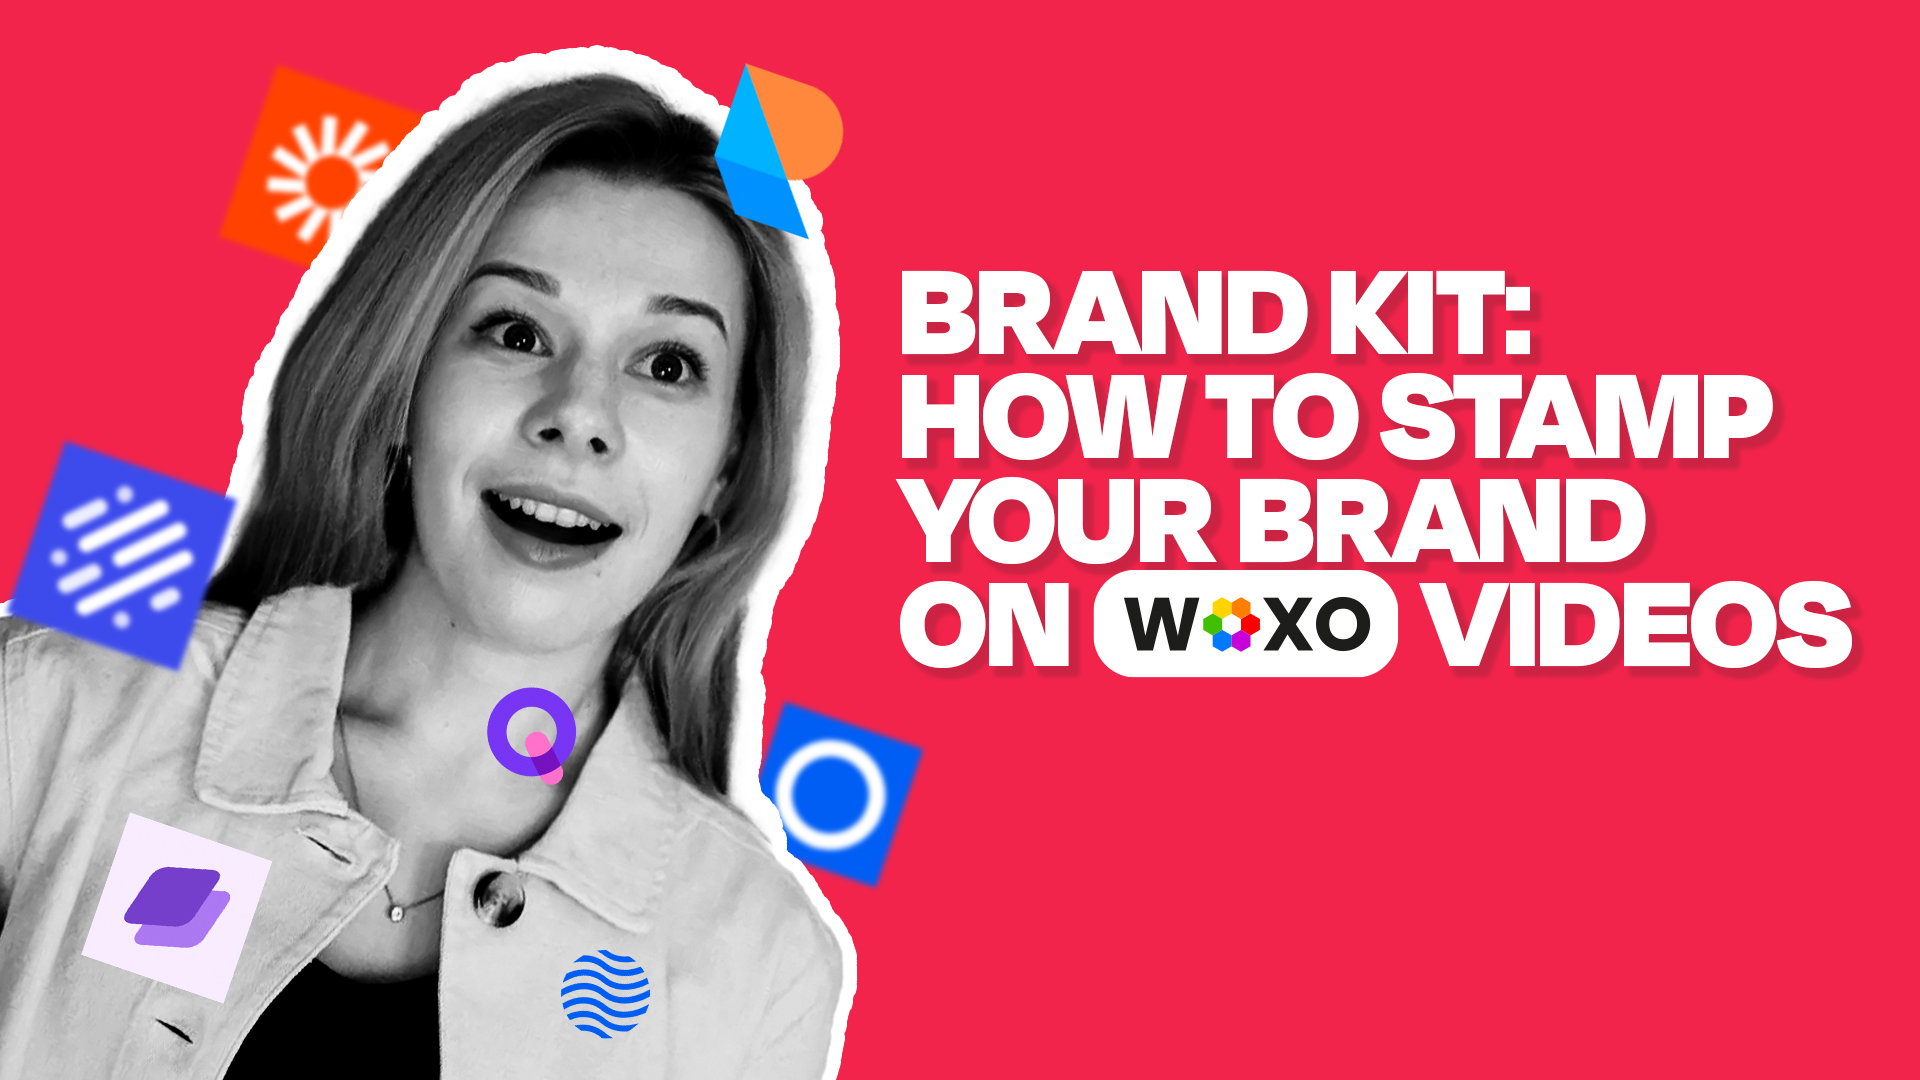 Brand Kit: How to Stamp Your Brand on WOXO Videos